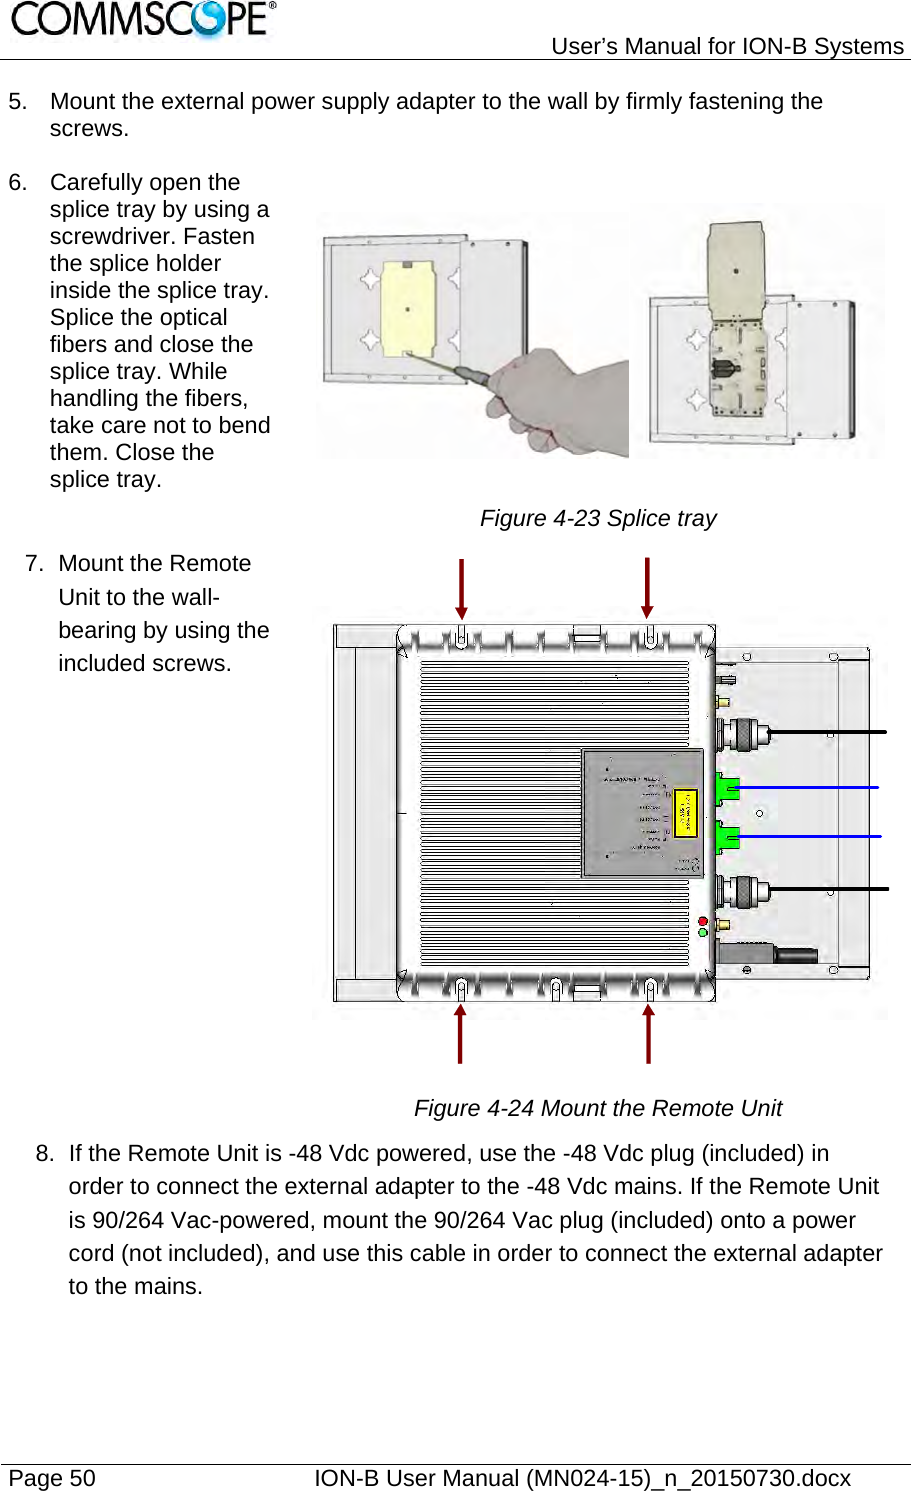   User’s Manual for ION-B Systems Page 50    ION-B User Manual (MN024-15)_n_20150730.docx  5.  Mount the external power supply adapter to the wall by firmly fastening the screws.  6.  Carefully open the splice tray by using a screwdriver. Fasten the splice holder inside the splice tray. Splice the optical fibers and close the splice tray. While handling the fibers, take care not to bend them. Close the splice tray.    Figure 4-23 Splice tray 7. Mount the Remote Unit to the wall-bearing by using the included screws.                   Figure 4-24 Mount the Remote Unit 8.  If the Remote Unit is -48 Vdc powered, use the -48 Vdc plug (included) in order to connect the external adapter to the -48 Vdc mains. If the Remote Unit is 90/264 Vac-powered, mount the 90/264 Vac plug (included) onto a power cord (not included), and use this cable in order to connect the external adapter to the mains.    